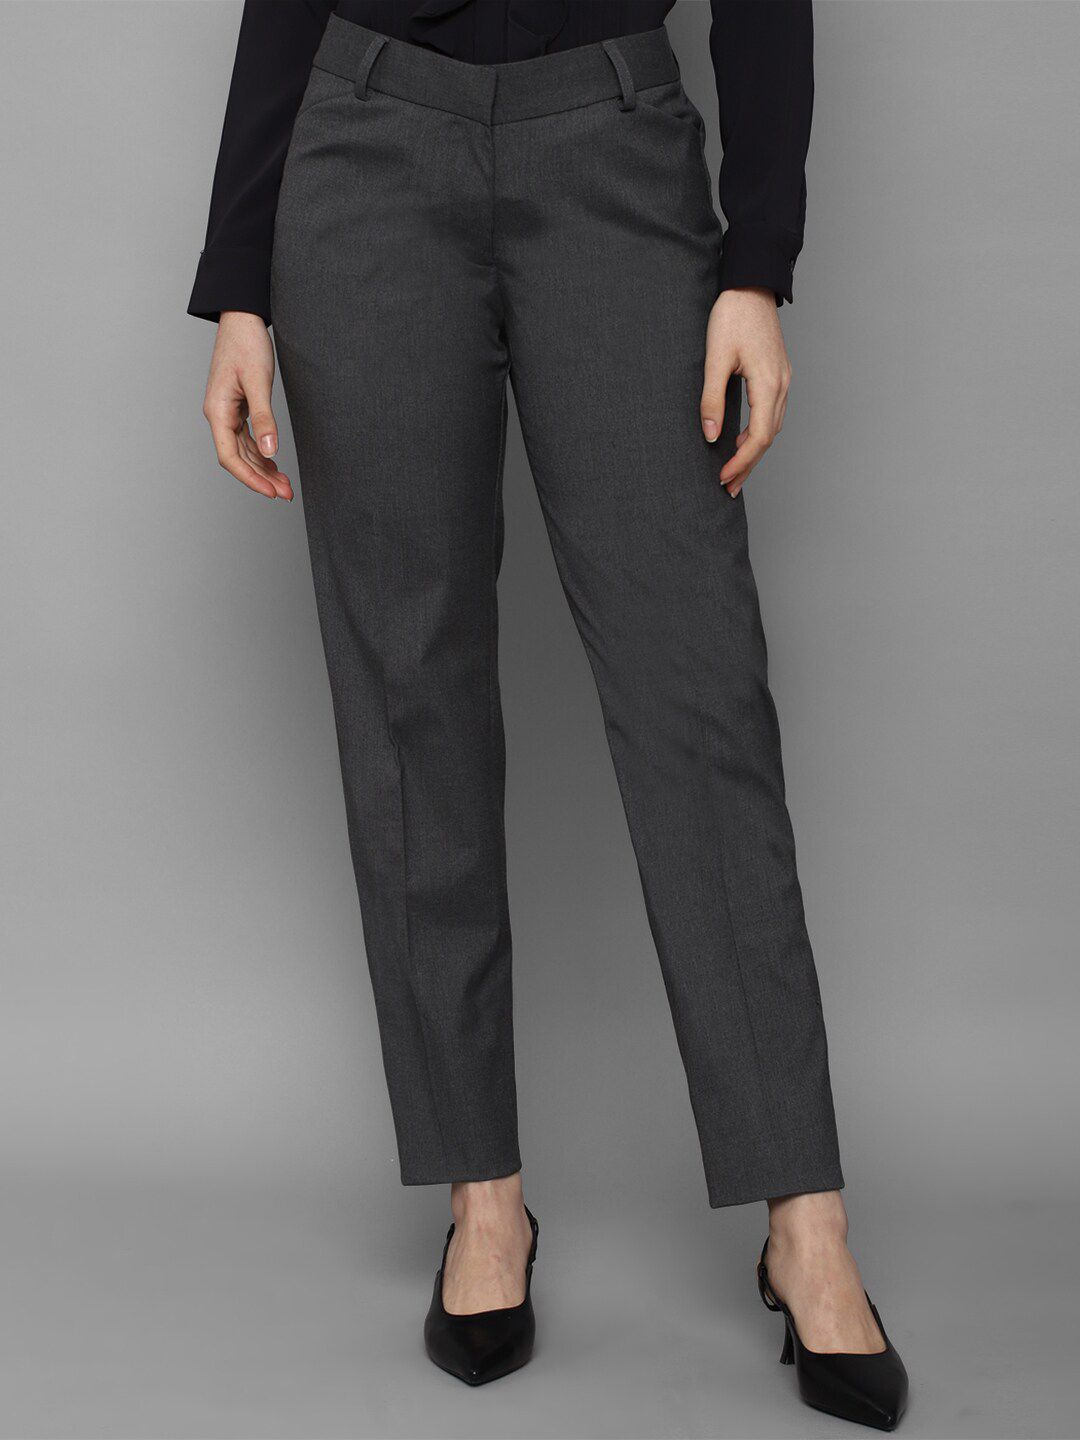 Allen Solly Woman Women Grey Solid Formal Trousers Price in India